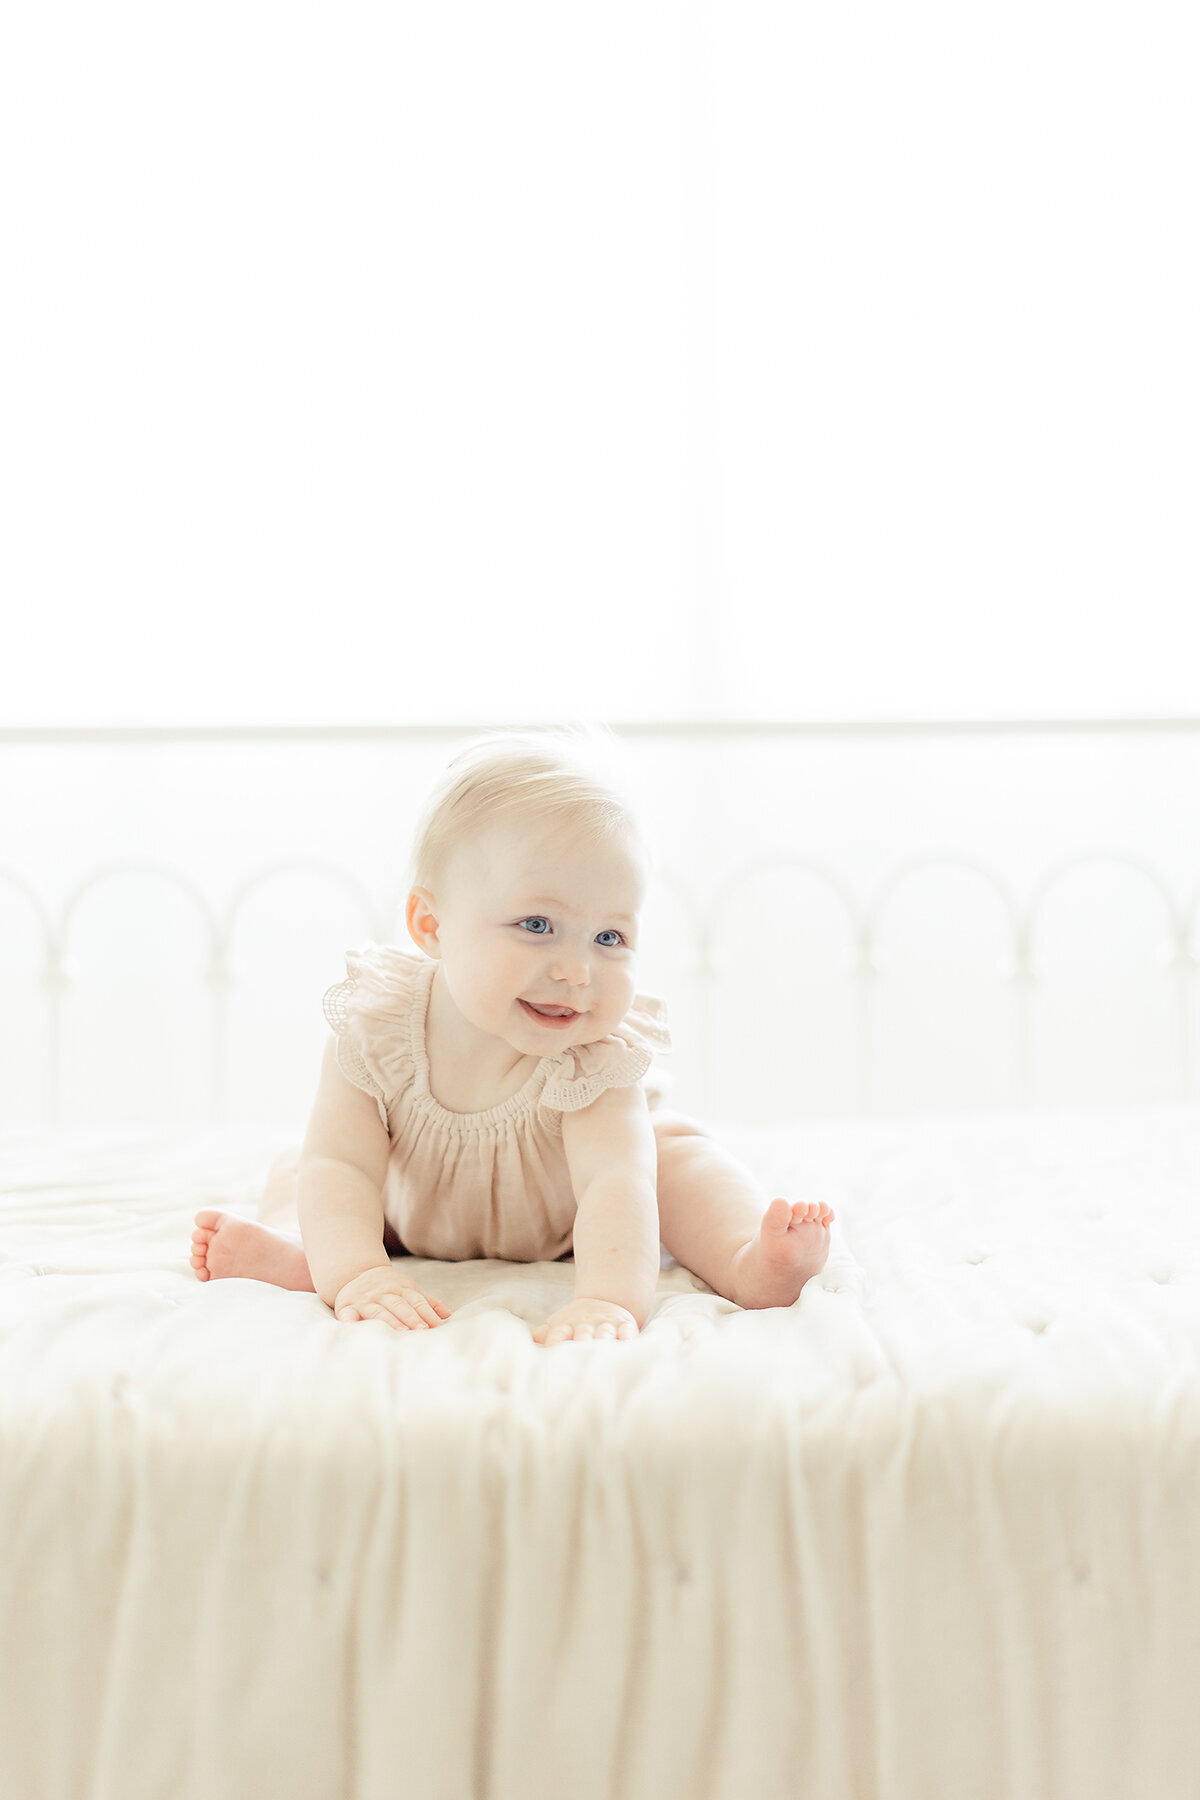 A sweet baby girl photo as she's sitting on a bed smiling at her mommy in a Fort Worth photography studio.